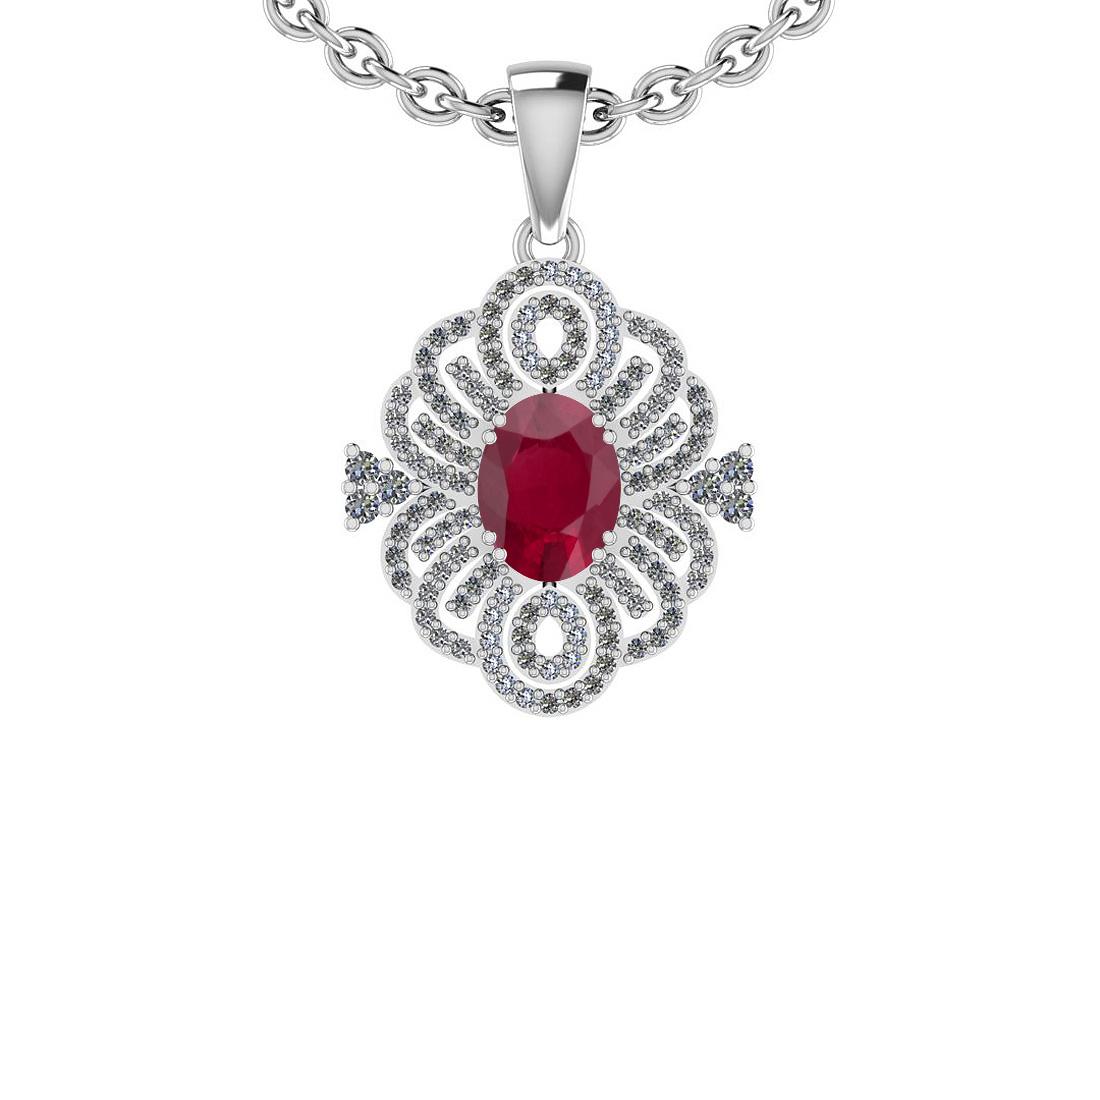 Certified 1.89 Ctw SI2/I1 Ruby And Diamond 14K White Gold Vintage Style Necklace